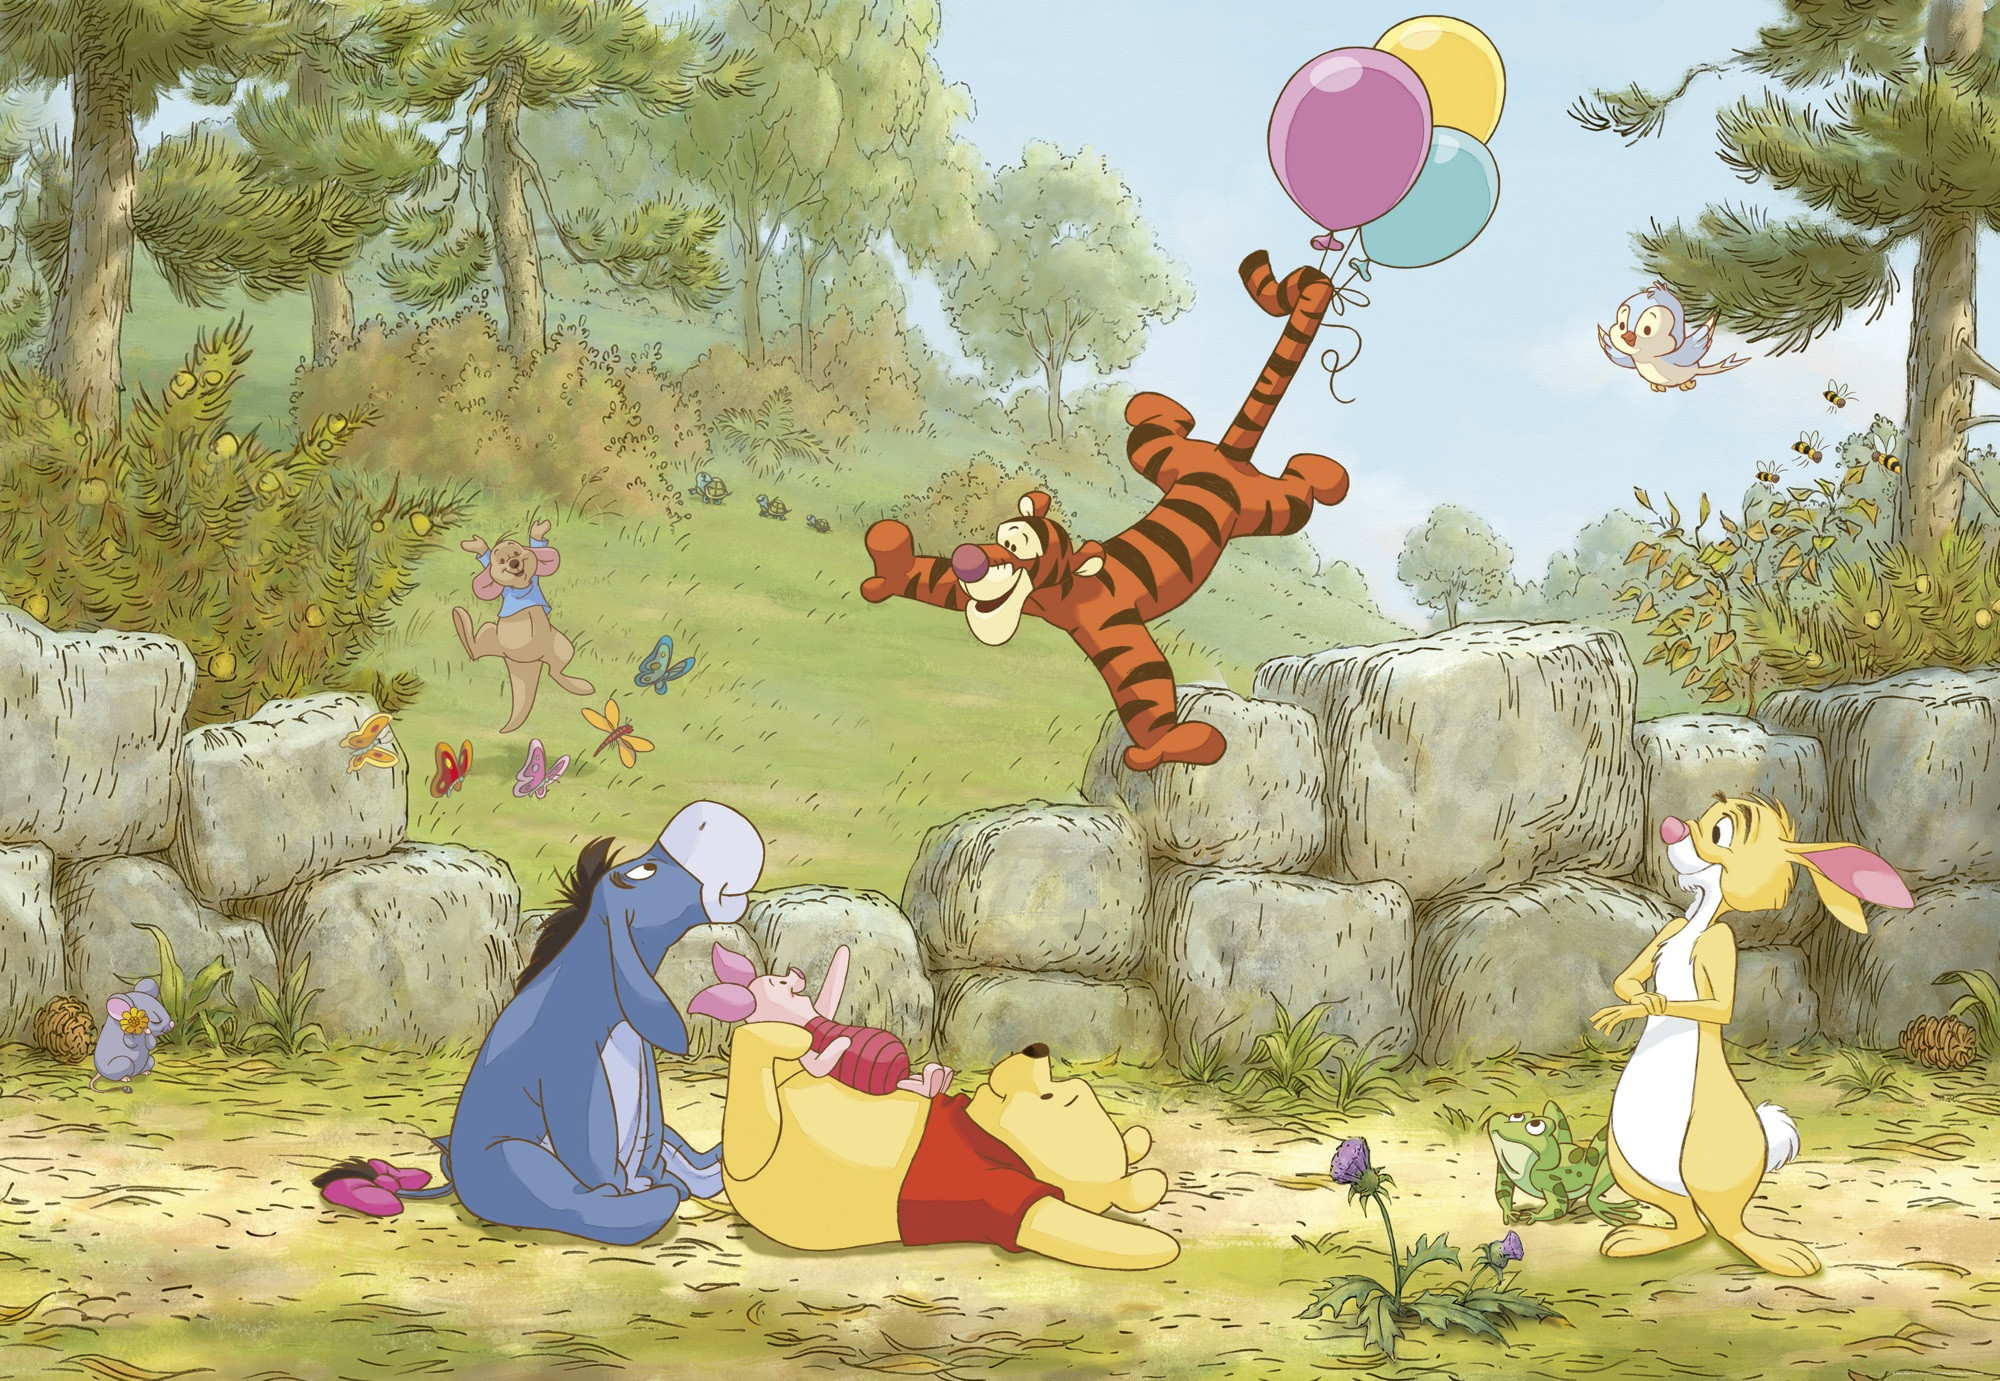 Photomurals  Photomural on paper Winnie the Pooh Ballooning by Komar®